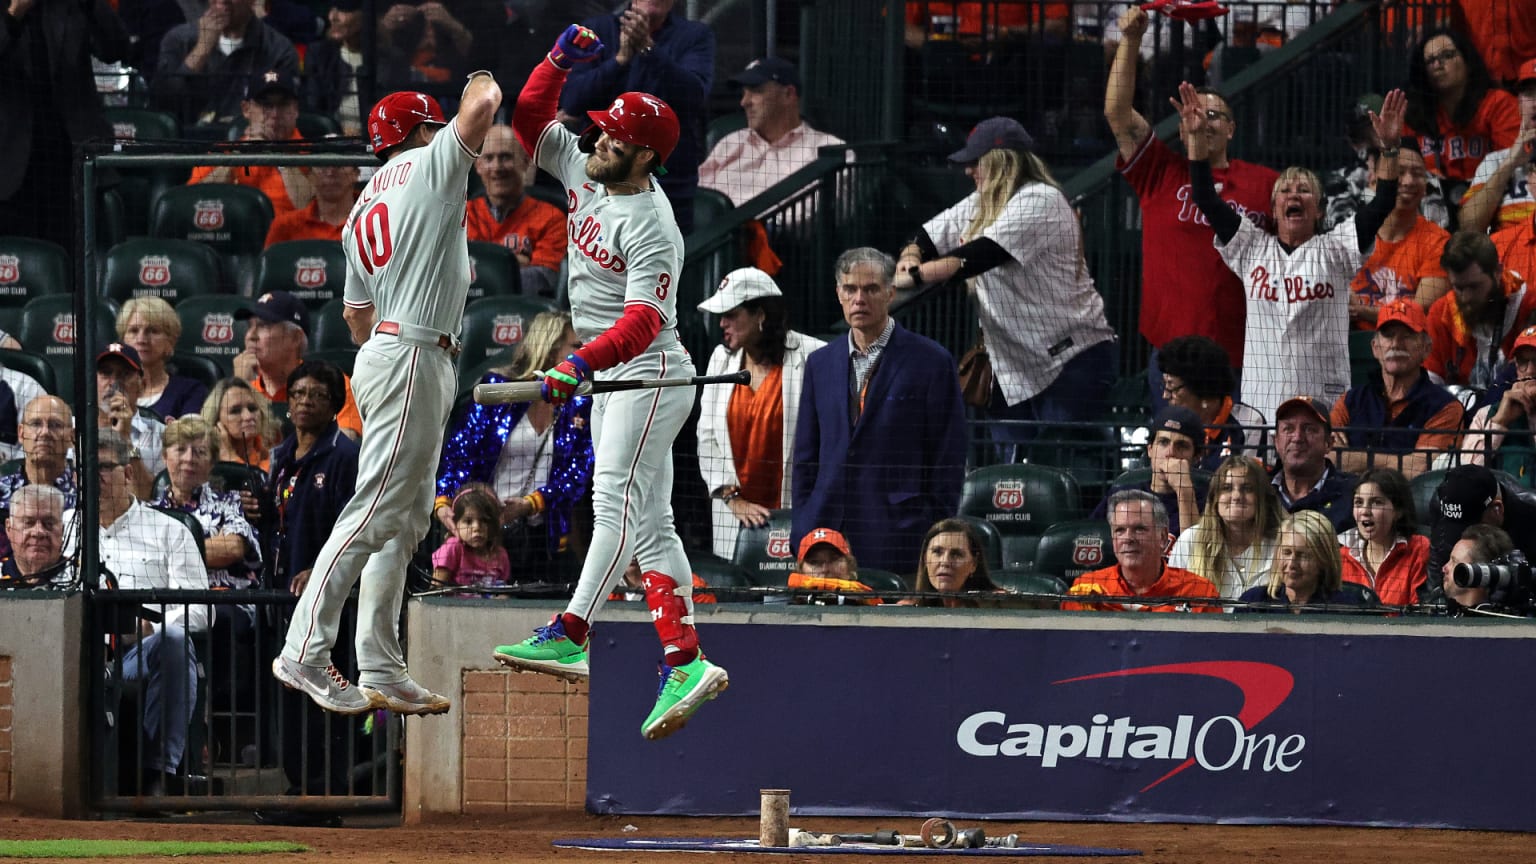 Two Phillies leap in the air to high-five near the stands